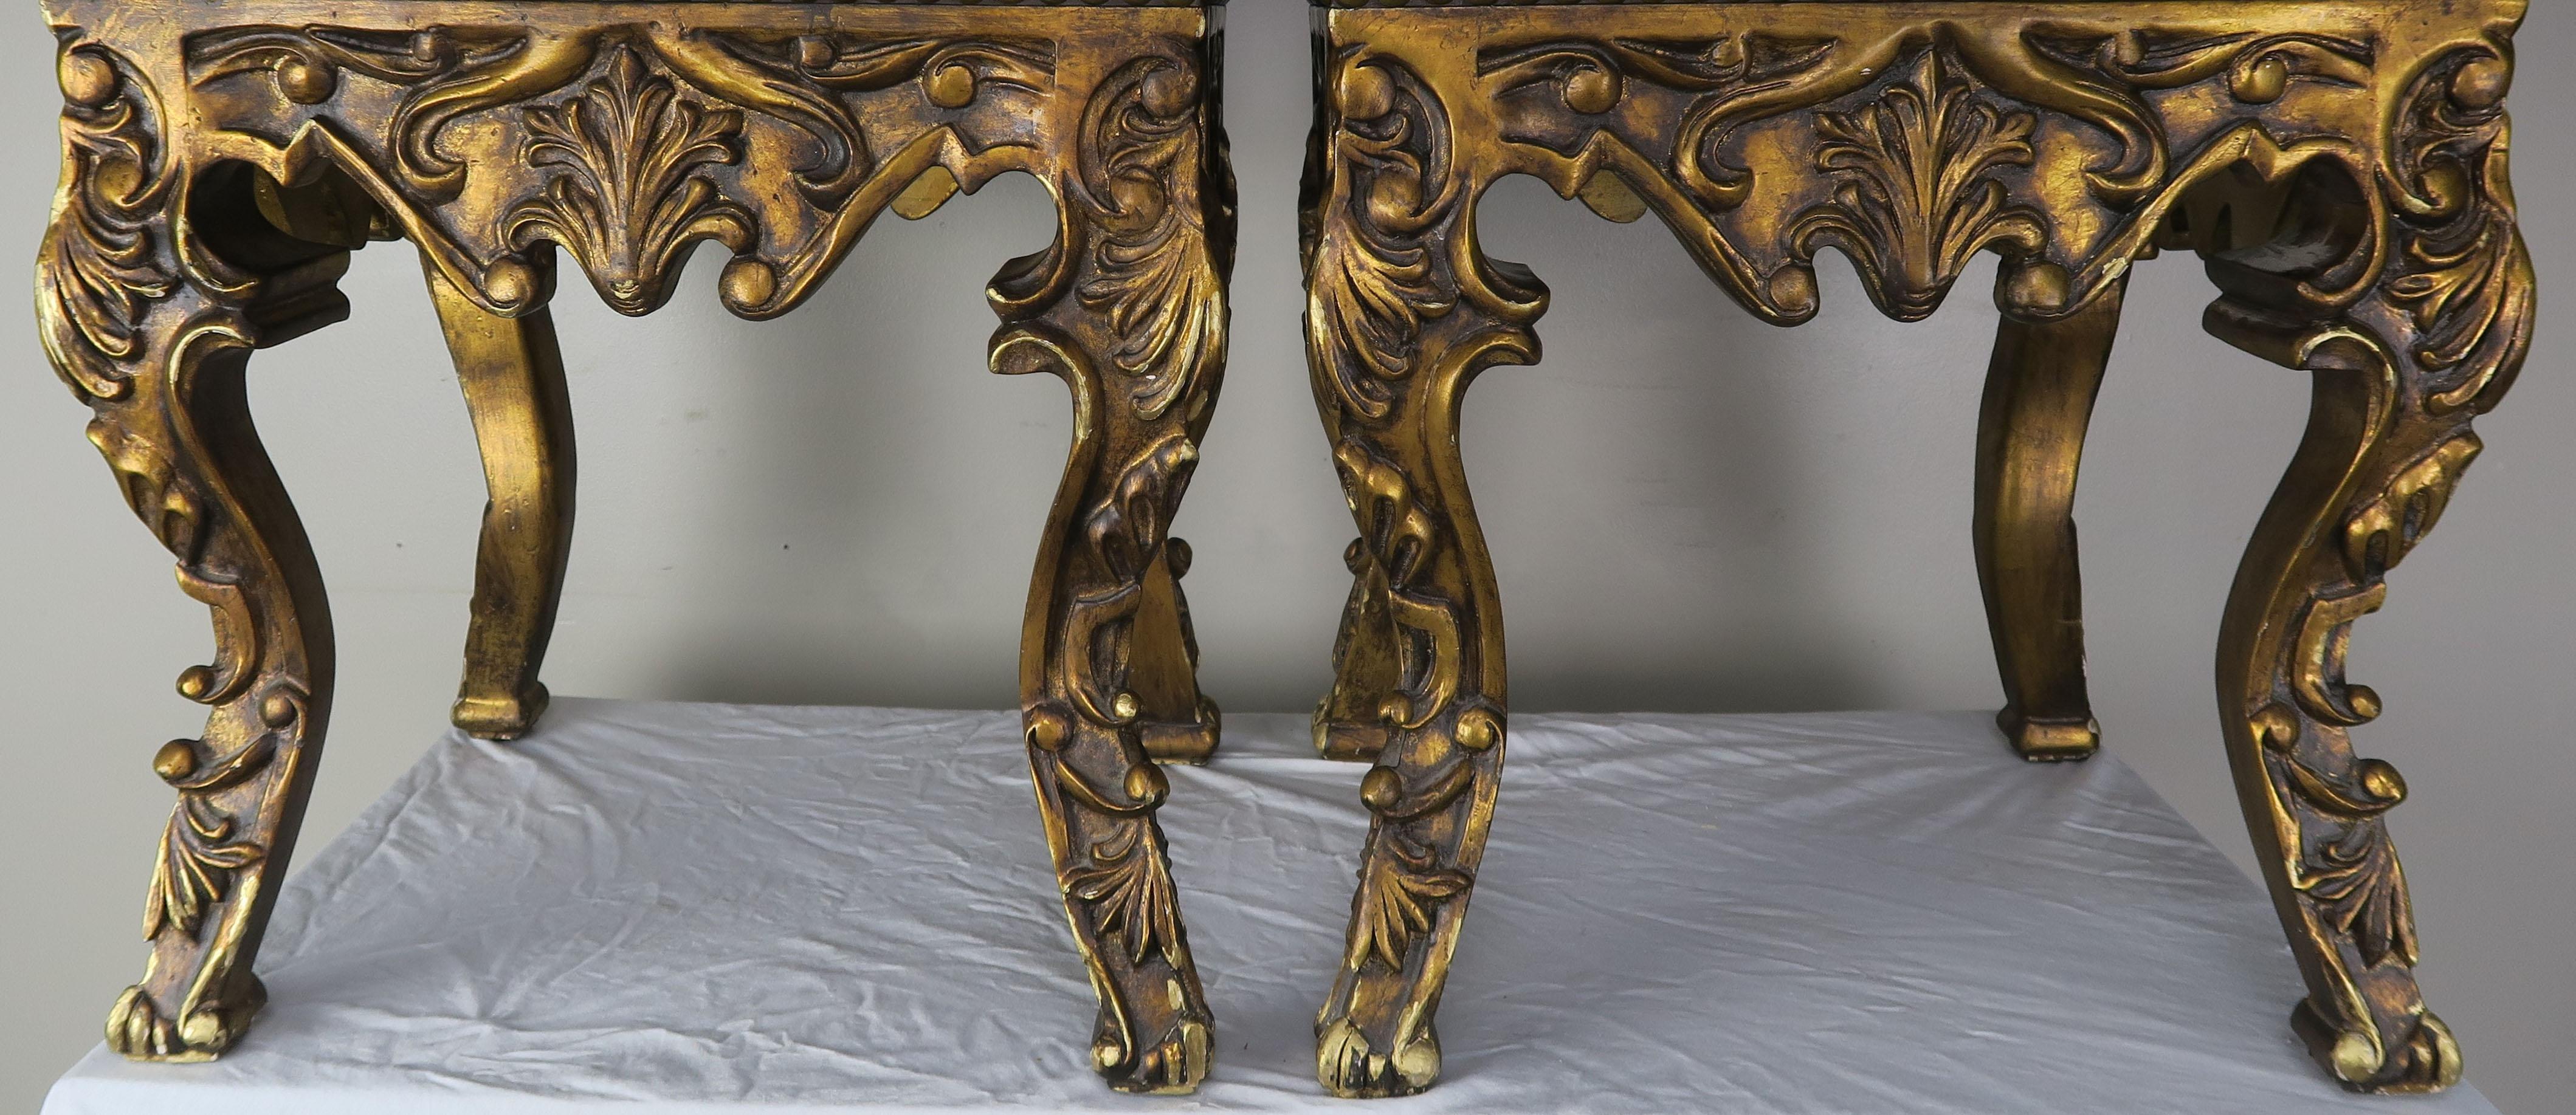 Pair of French Louis XV leather benches upholstered in brown colored leather with antique brass colored nailhead twin detail. Beautiful carving throughout the antique giltwood finish. The benches stand on four cabriole legs that are beautifully